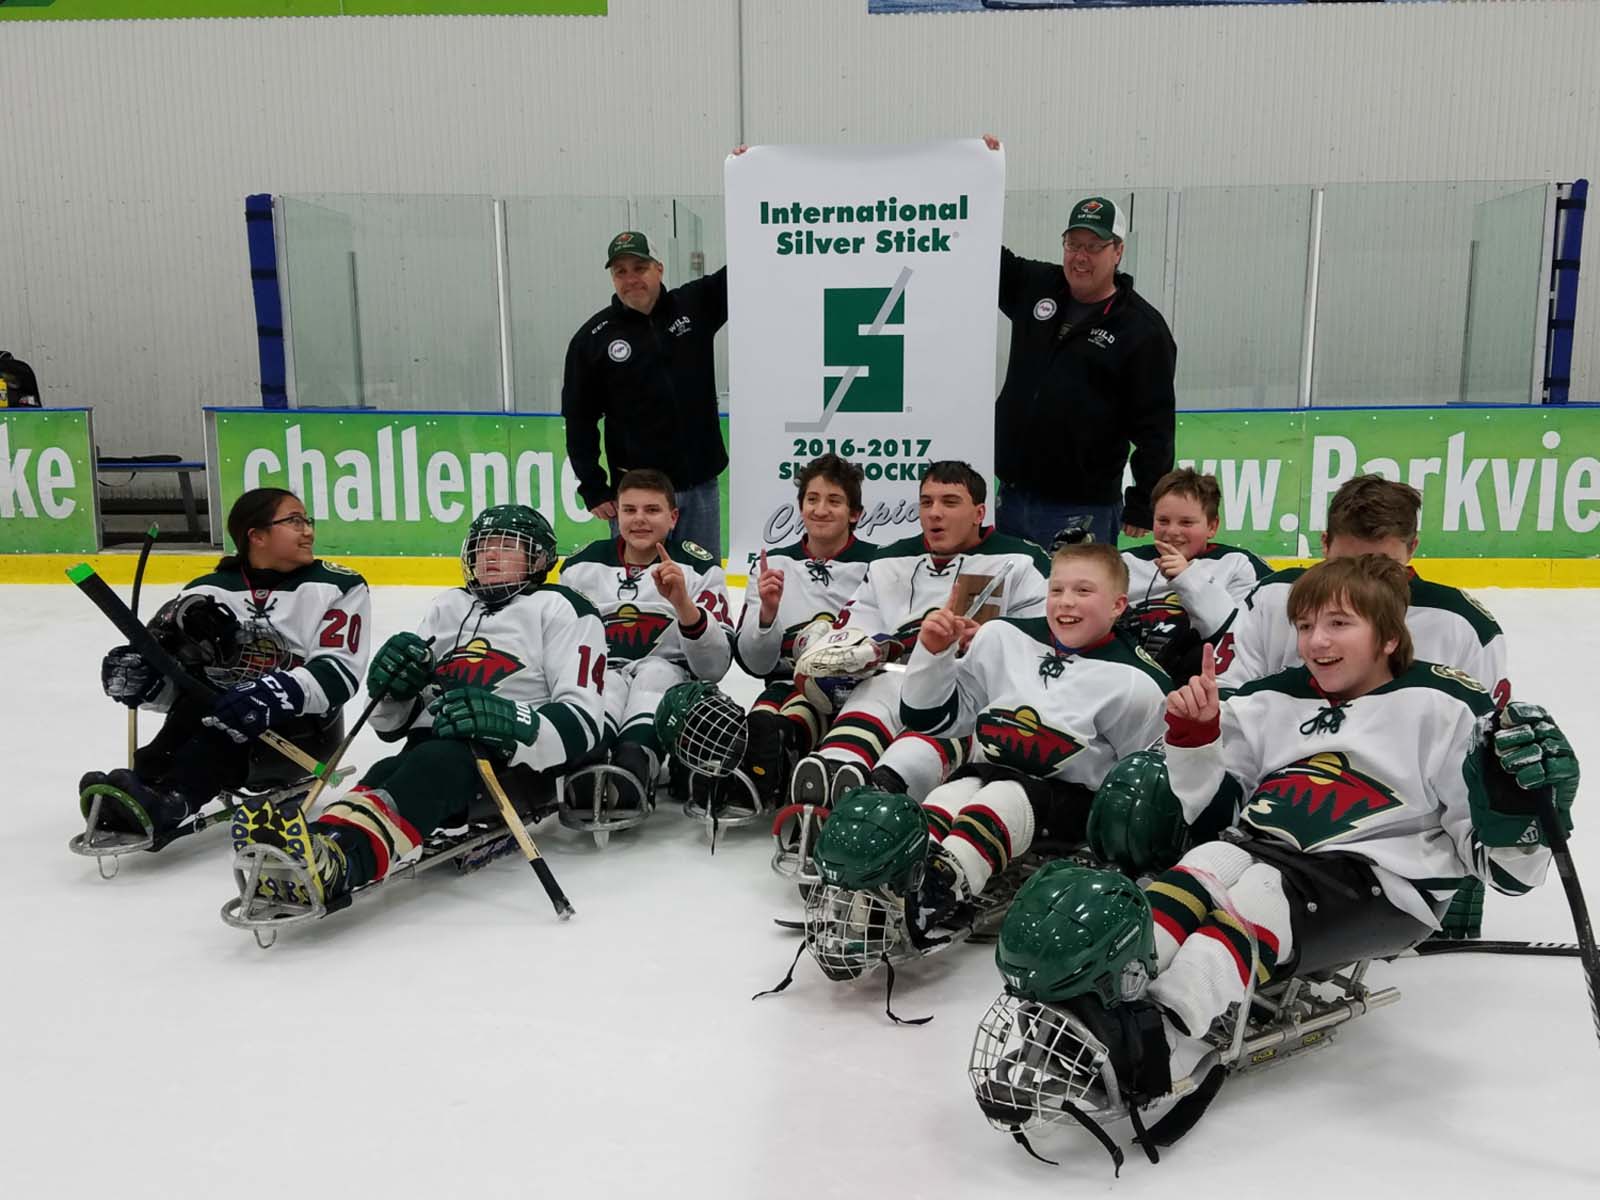 Joe and his hockey team on the ice holding a banner